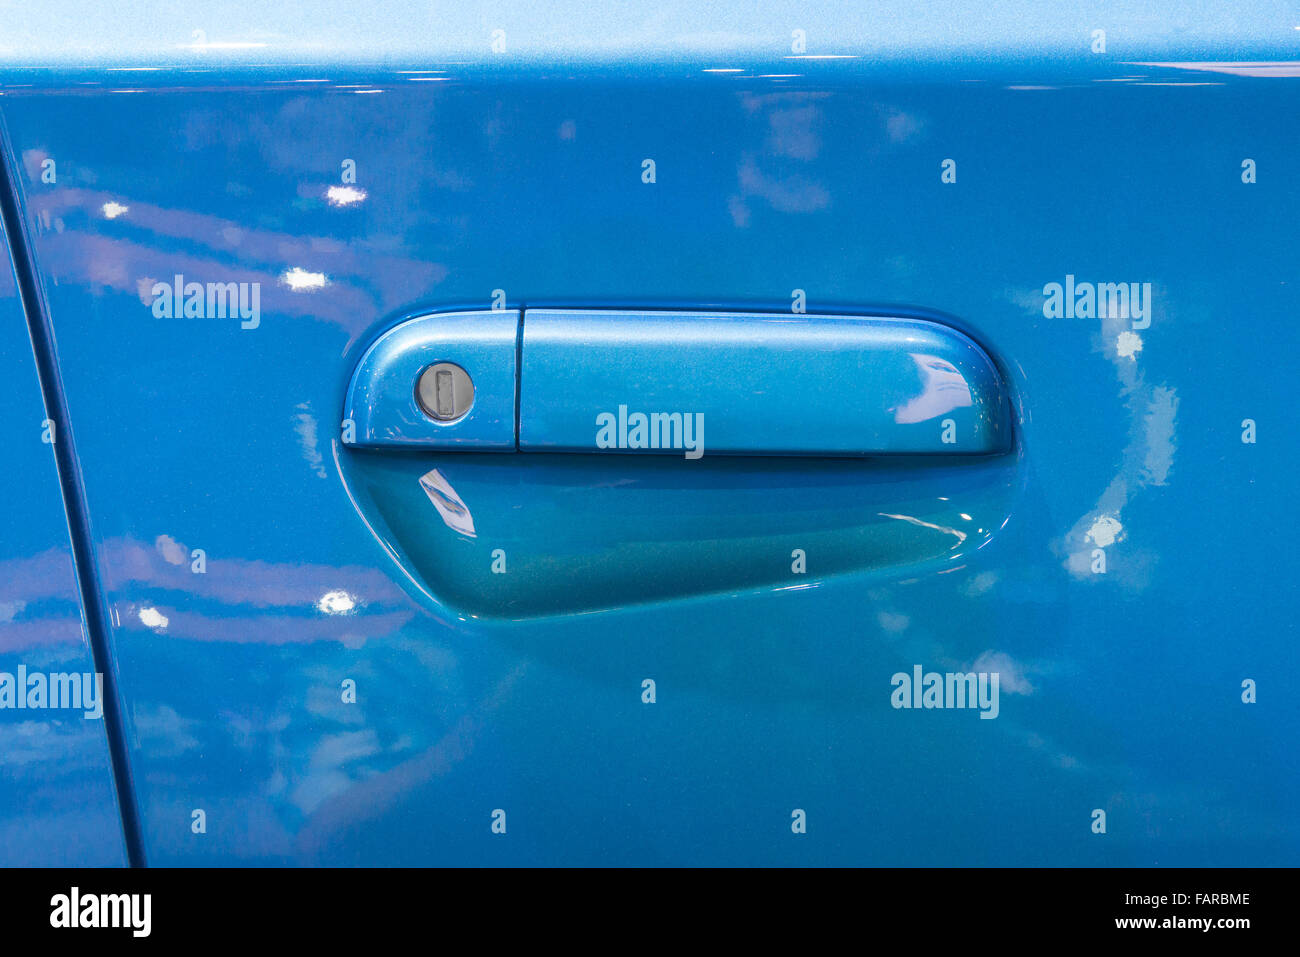 Door handle on a white car door coated with a 2-component heavy-duty  protective paint for extreme conditions, raptor paint Stock Photo - Alamy